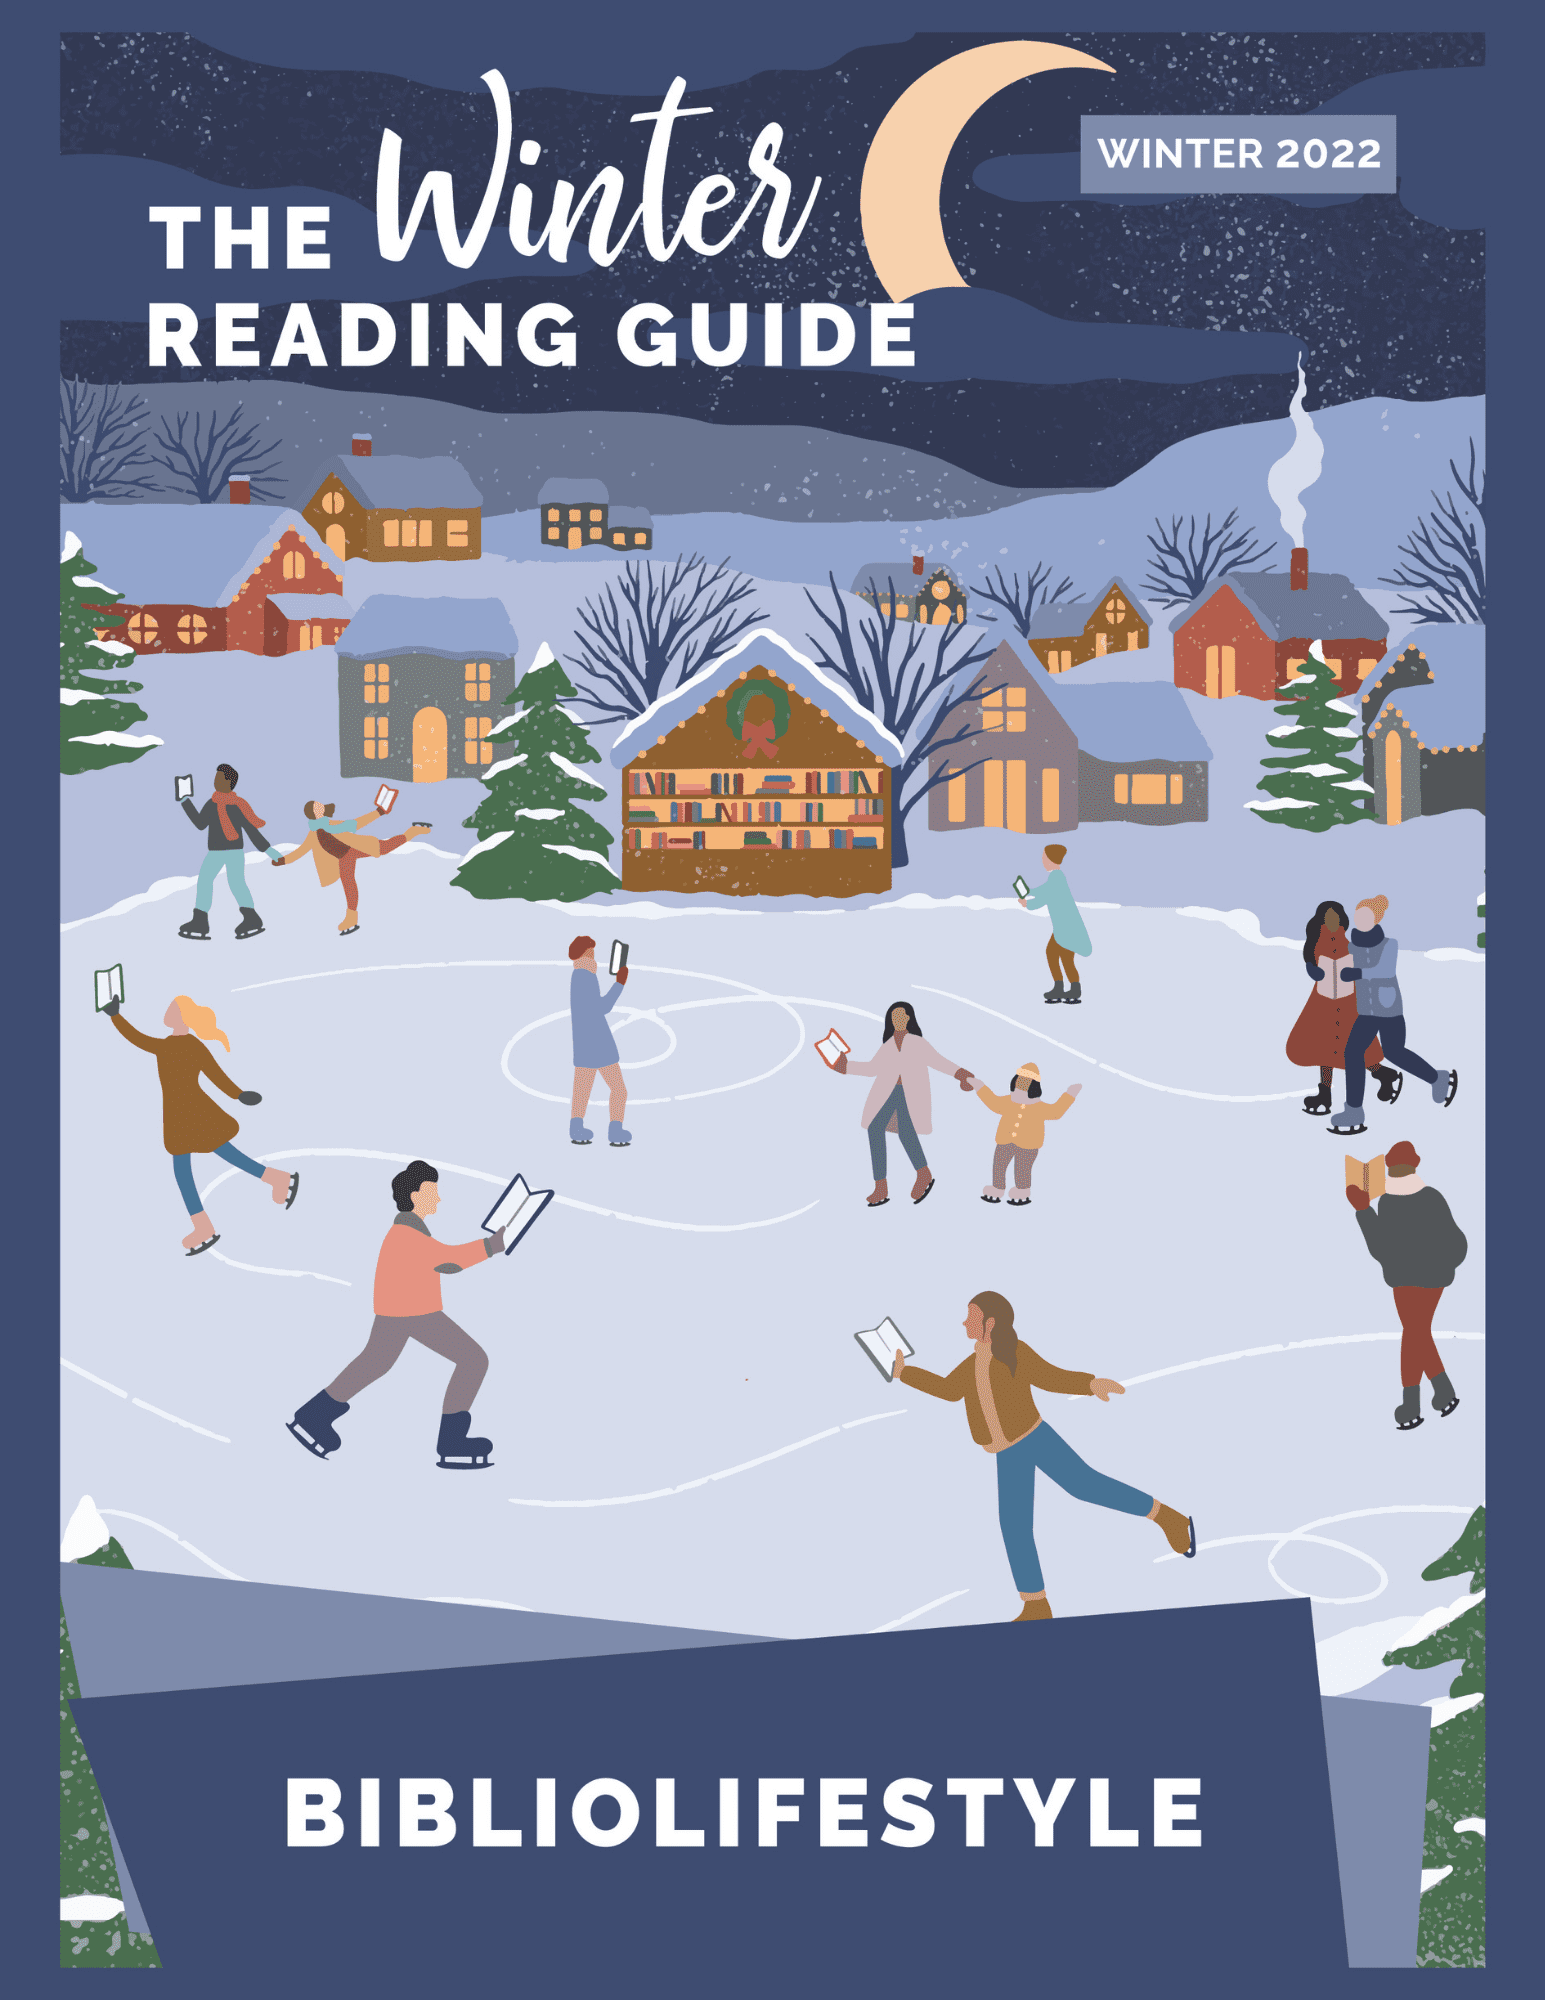 The 2022 Winter Reading Guide